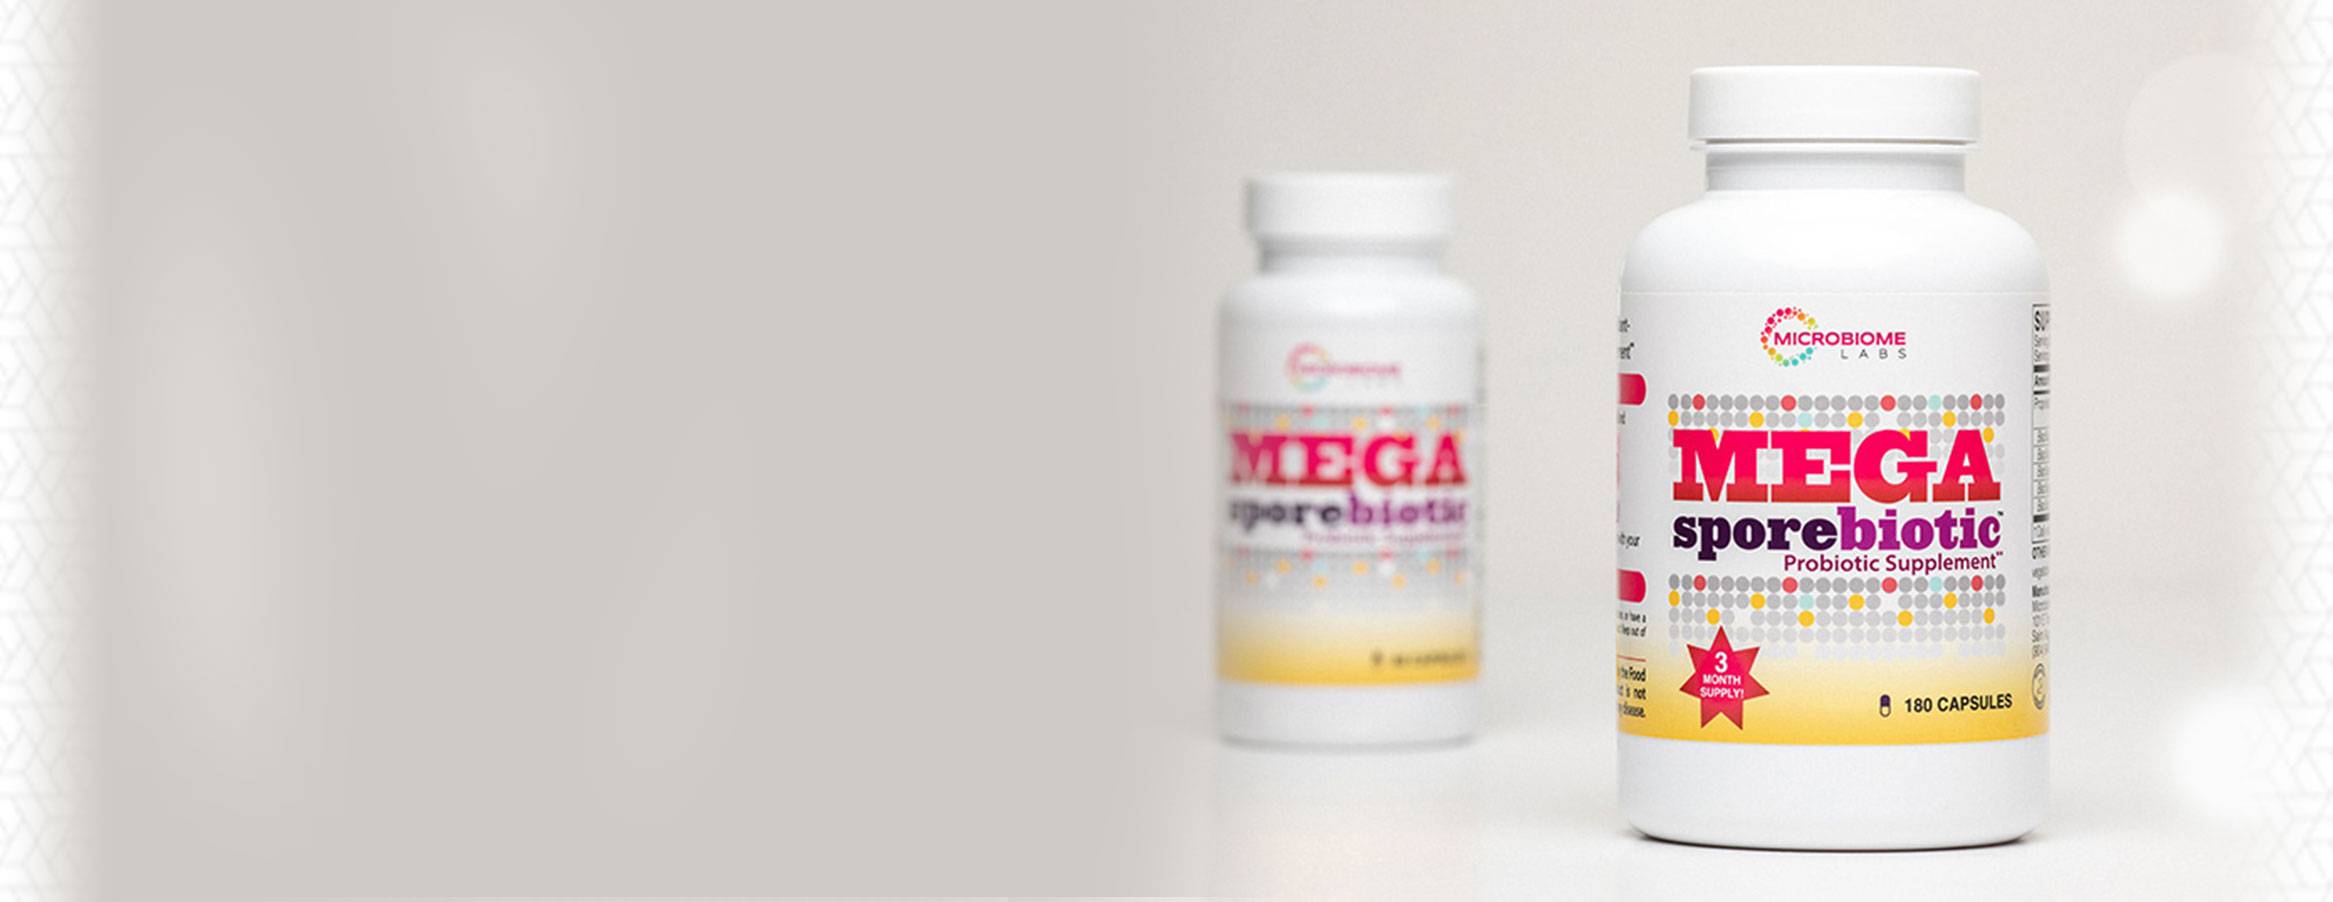 MegaSporeBiotic For Weight Loss, Parasites & Leaky-gut